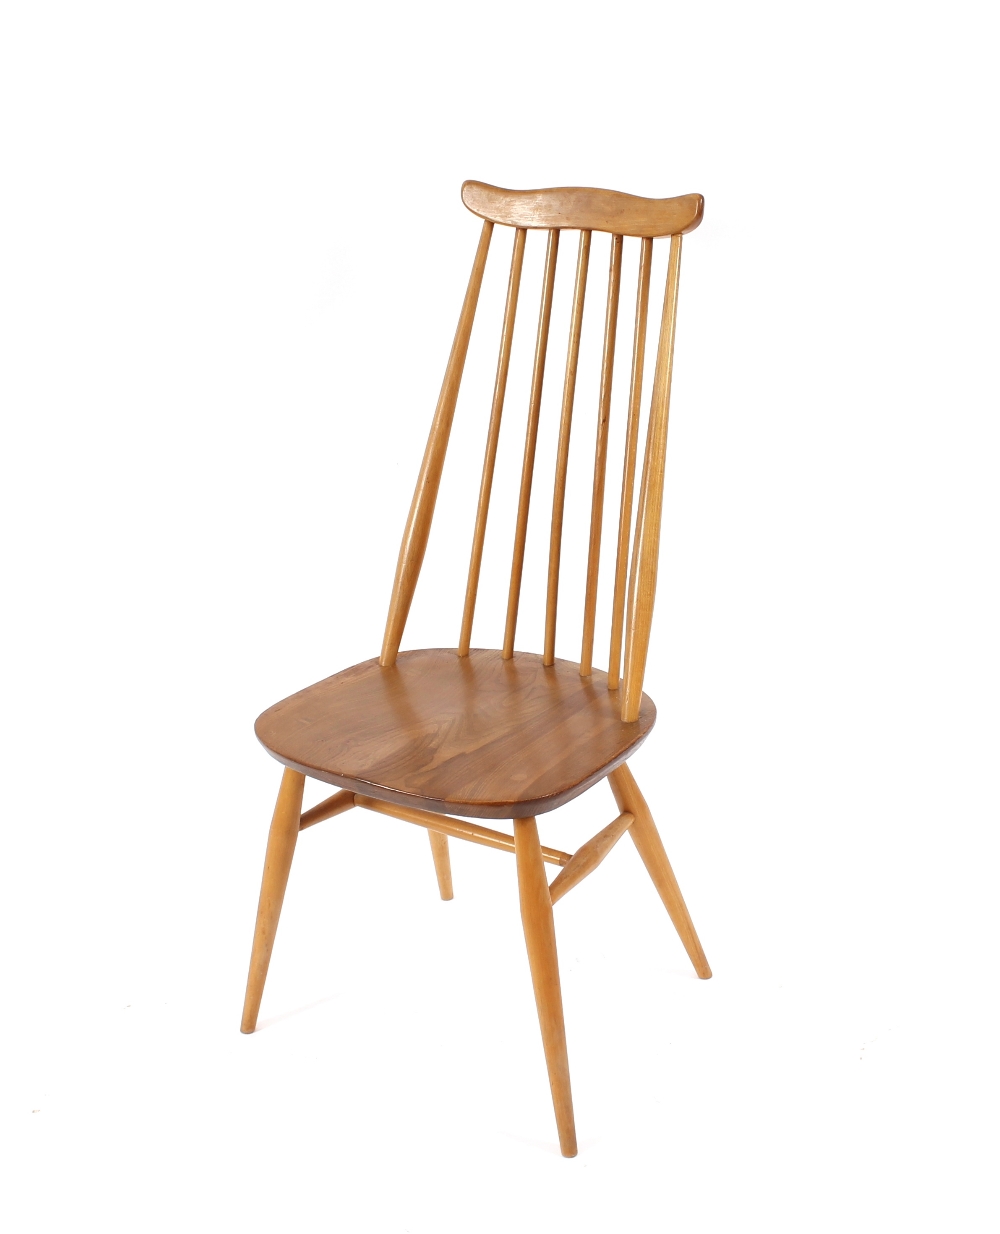 Four light Ercol stick back dining chairs, with sh